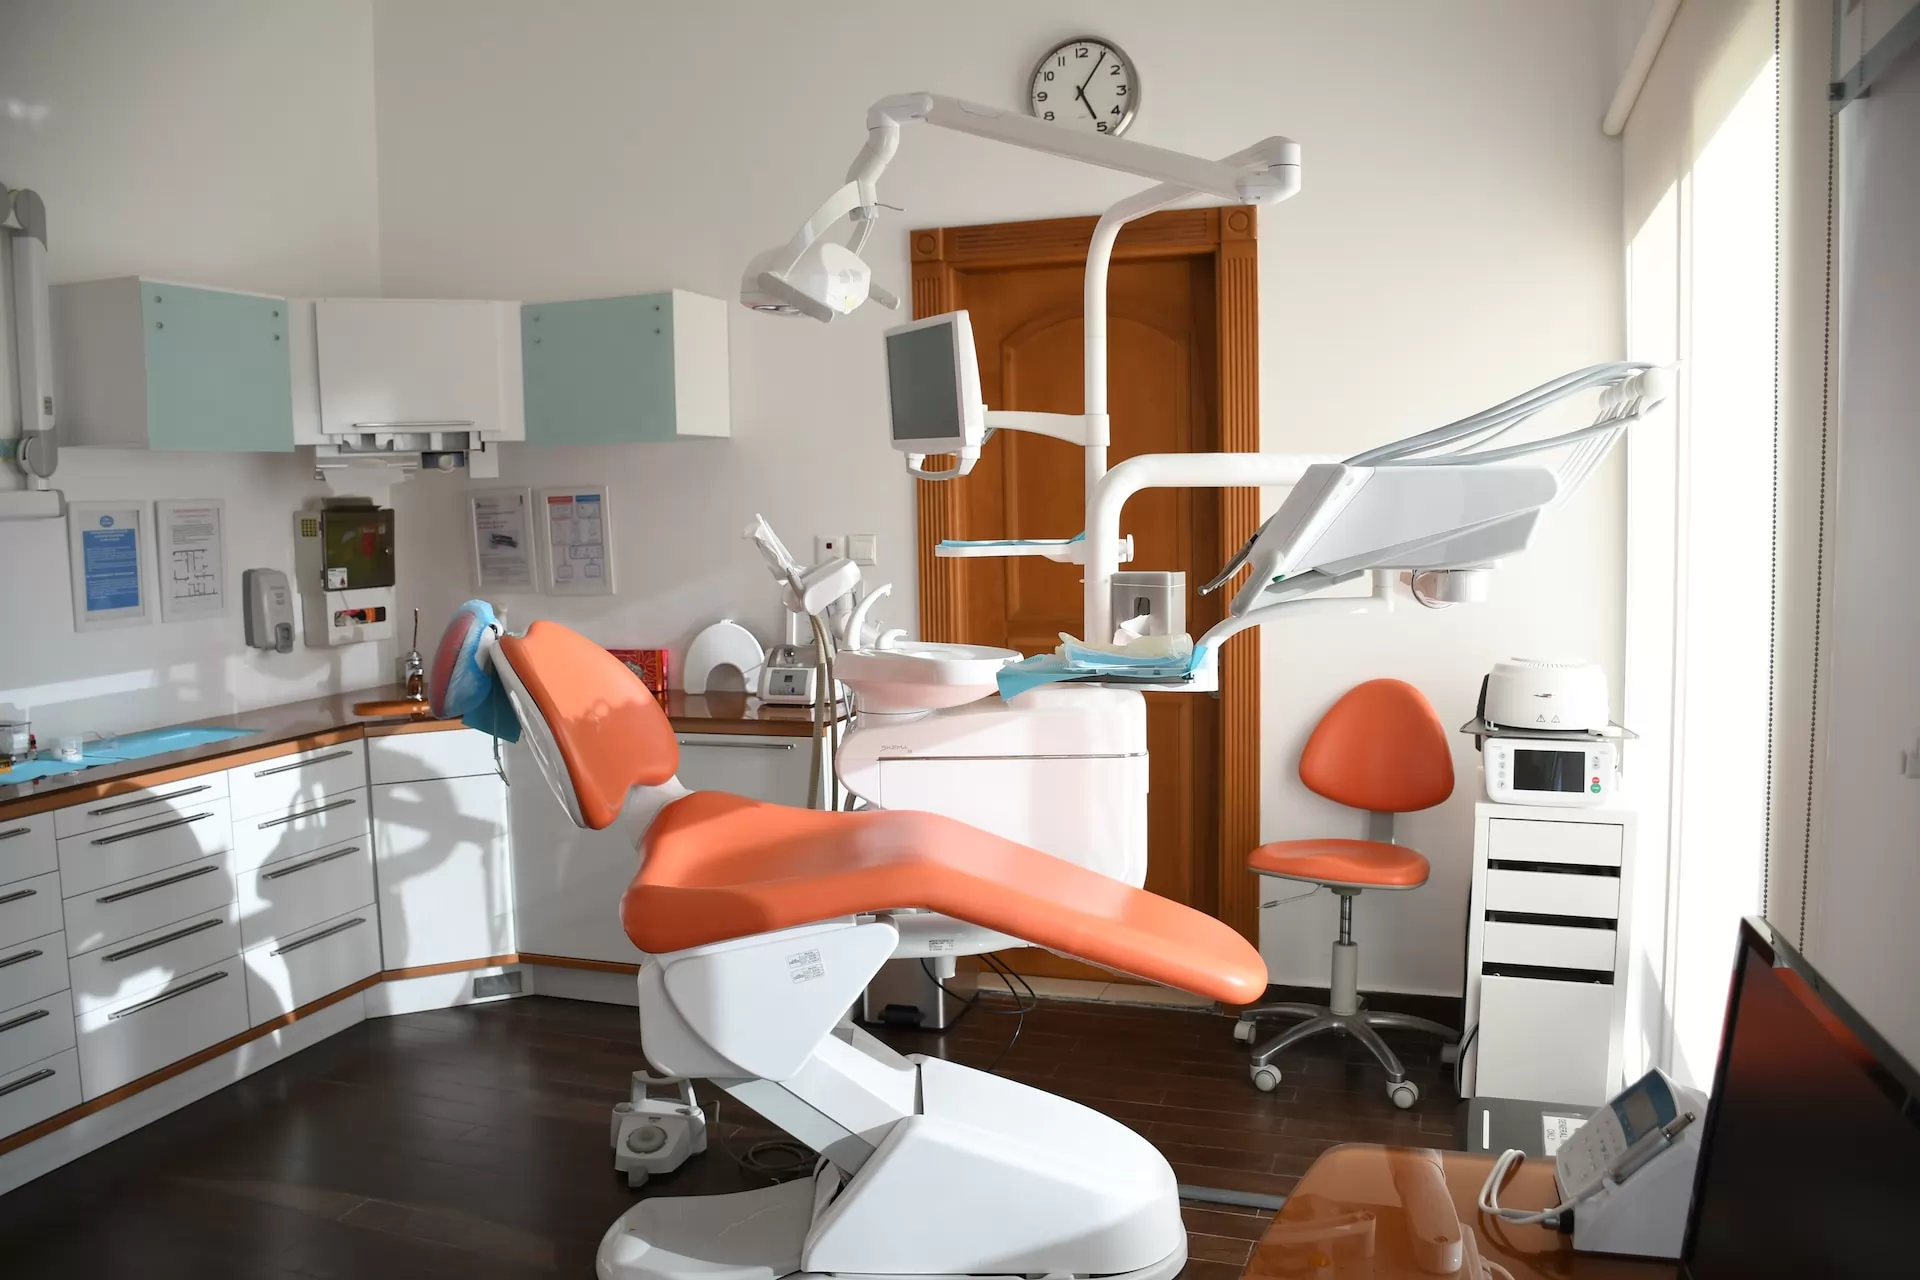 The market for dentists and dental practices